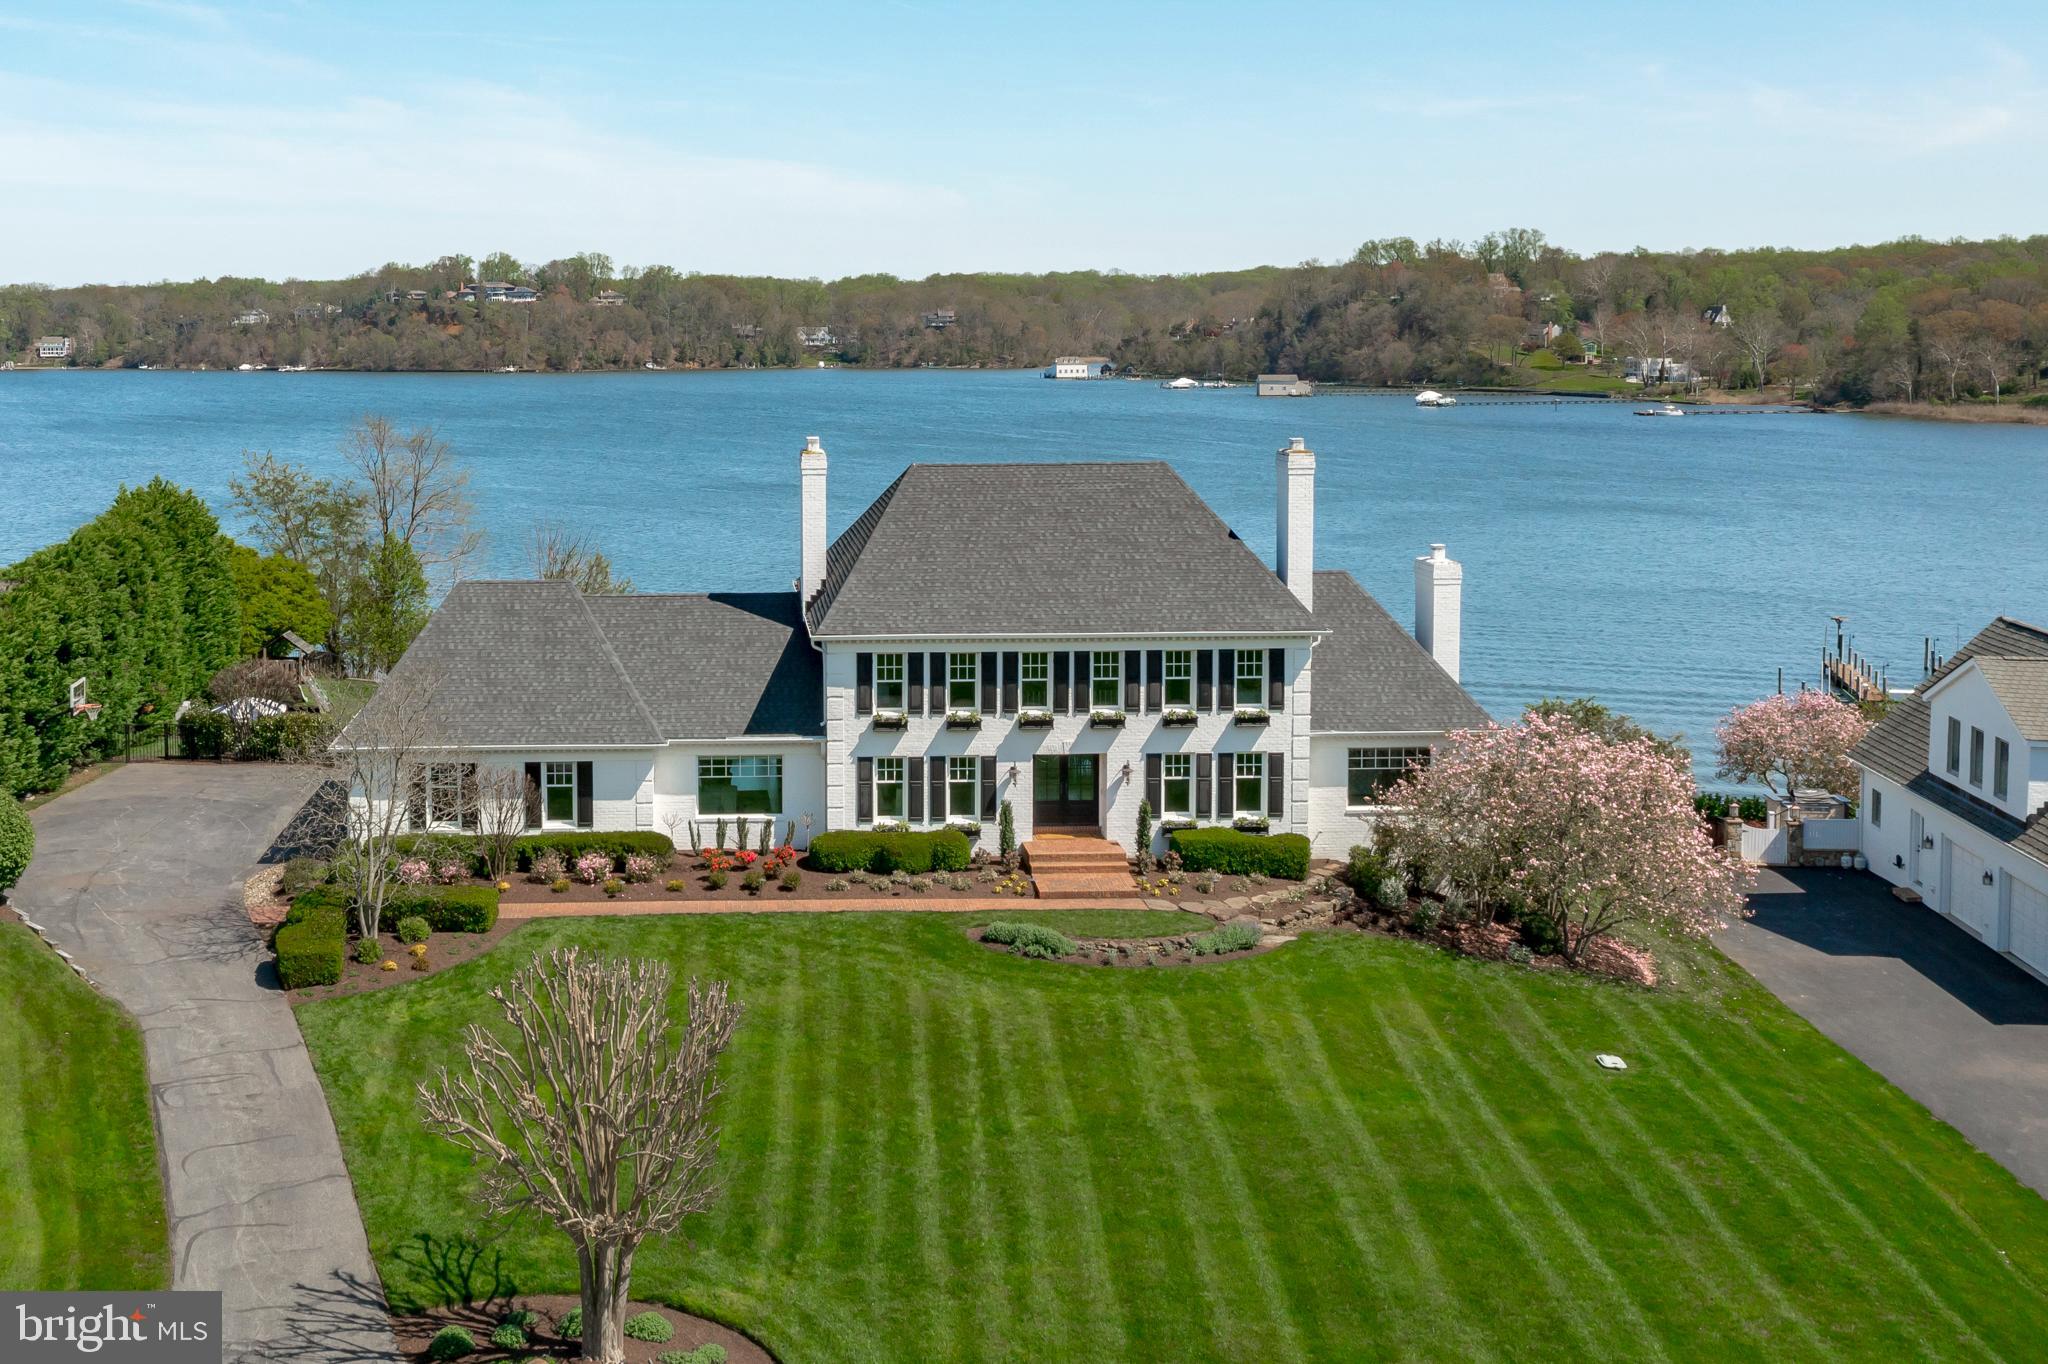 a aerial view of a house with a garden and lake view